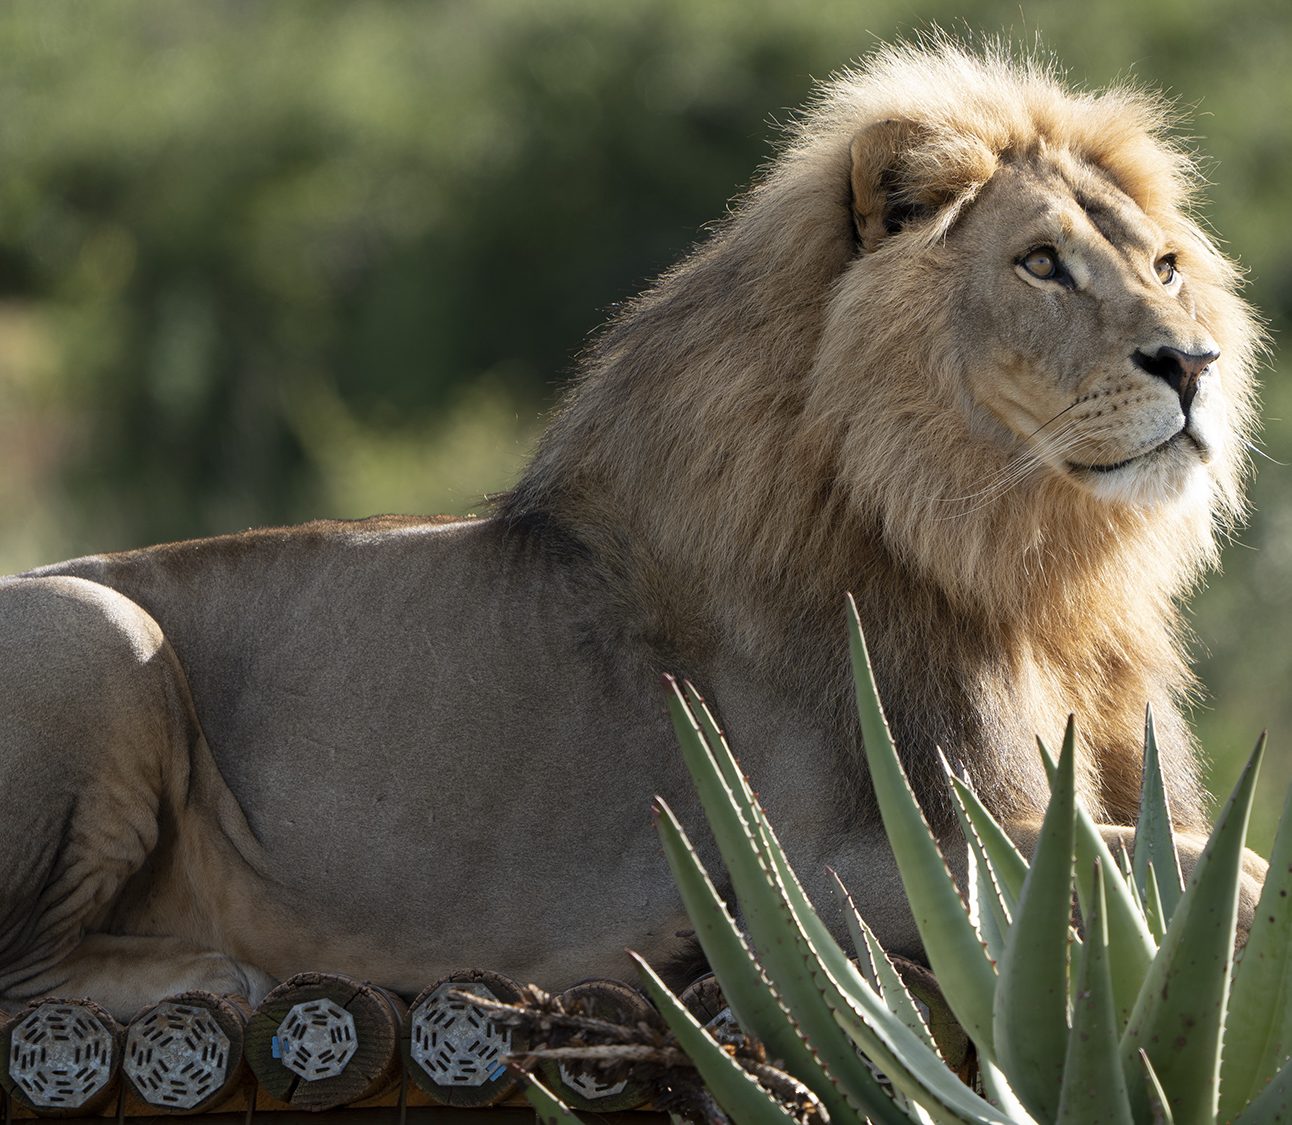 A male lion sits on a wooden platform looking into the distance